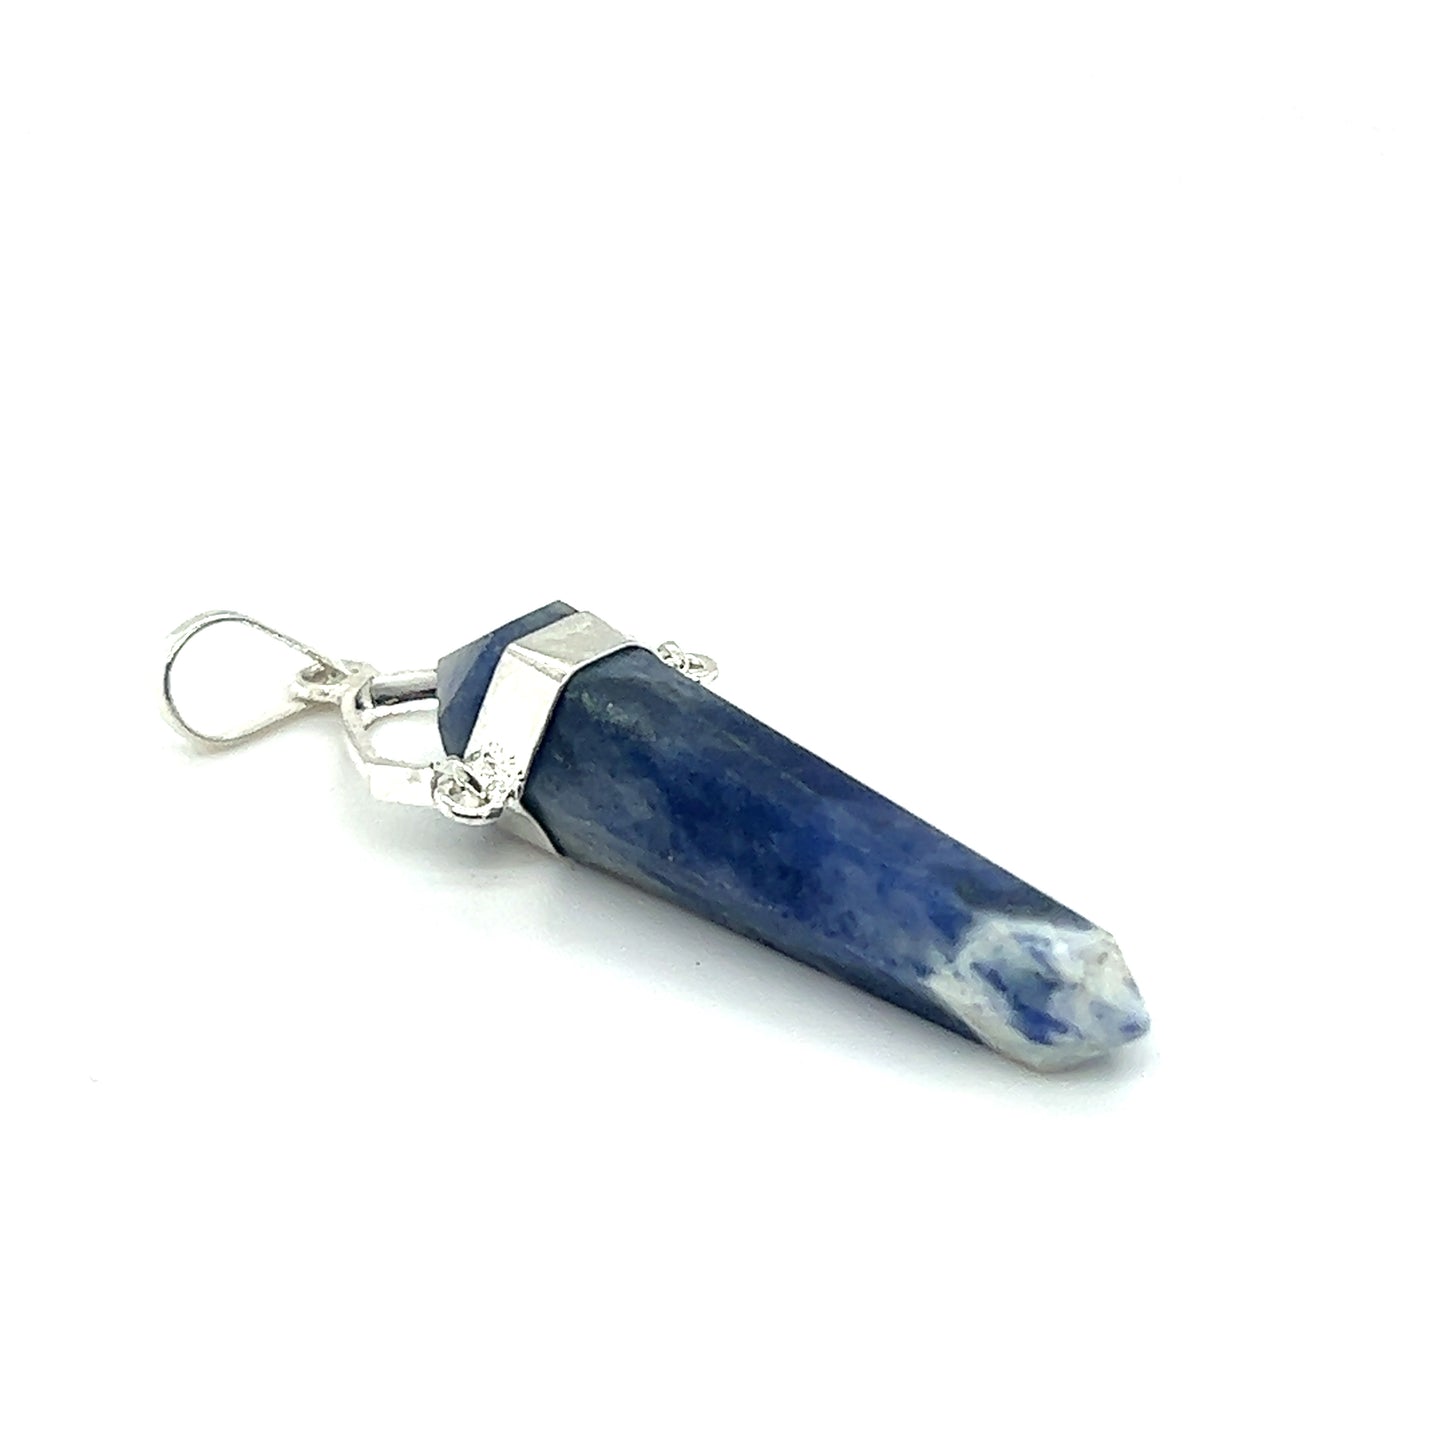 
                  
                    A Raw Stone Swivel Pendant with a pointed tip, set in a silver-plated setting, metal clasp, and a small loop at the top for attaching to a chain, placed against a white background.
                  
                